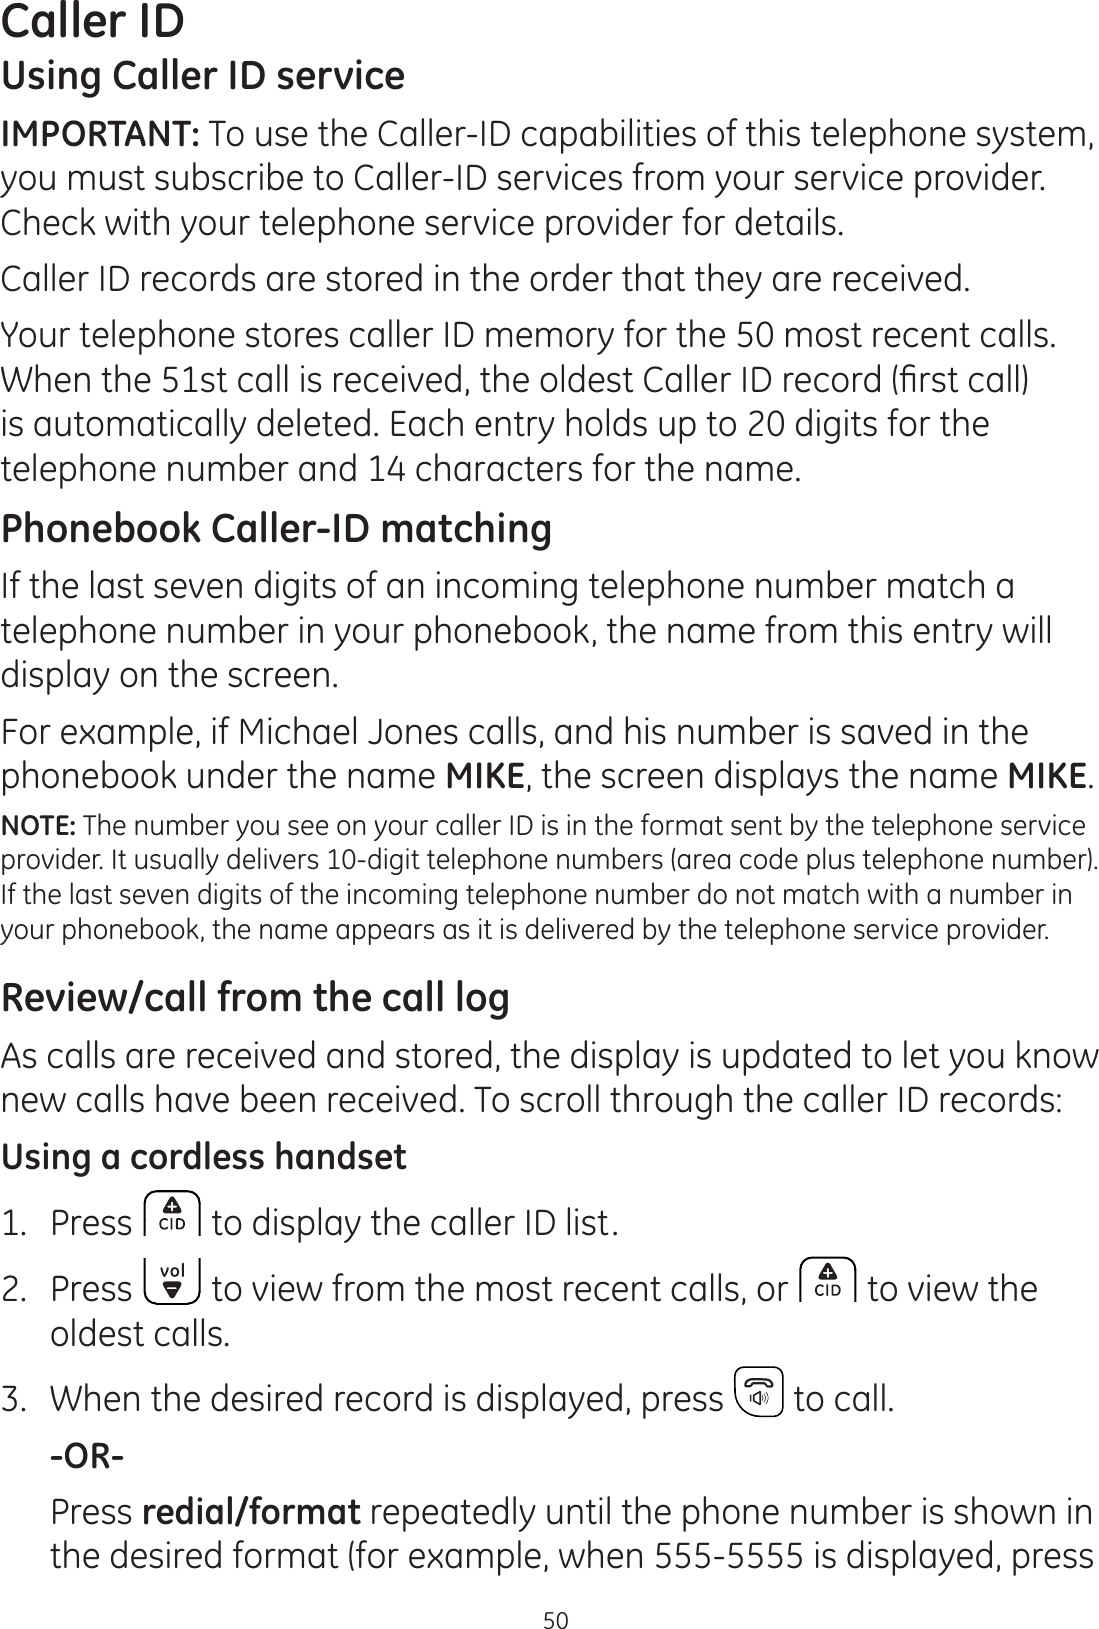 50Caller IDUsing Caller ID serviceIMPORTANT: To use the Caller-ID capabilities of this telephone system, you must subscribe to Caller-ID services from your service provider.  Check with your telephone service provider for details.Caller ID records are stored in the order that they are received.Your telephone stores caller ID memory for the 50 most recent calls. :KHQWKHVWFDOOLVUHFHLYHGWKHROGHVW&amp;DOOHU,&apos;UHFRUG¿UVWFDOOis automatically deleted. Each entry holds up to 20 digits for the telephone number and 14 characters for the name.Phonebook Caller-ID matchingIf the last seven digits of an incoming telephone number match a telephone number in your phonebook, the name from this entry will display on the screen.For example, if Michael Jones calls, and his number is saved in the phonebook under the name MIKE, the screen displays the name MIKE.NOTE: The number you see on your caller ID is in the format sent by the telephone service provider. It usually delivers 10-digit telephone numbers (area code plus telephone number). If the last seven digits of the incoming telephone number do not match with a number in your phonebook, the name appears as it is delivered by the telephone service provider. Review/call from the call logAs calls are received and stored, the display is updated to let you know new calls have been received. To scroll through the caller ID records:Using a cordless handset1.  Press  to display the caller ID list.2.  Press   to view from the most recent calls, or   to view the  oldest calls.3.  When the desired record is displayed, press   to call. -OR-  Press redial/format repeatedly until the phone number is shown in the desired format (for example, when 555-5555 is displayed, press 